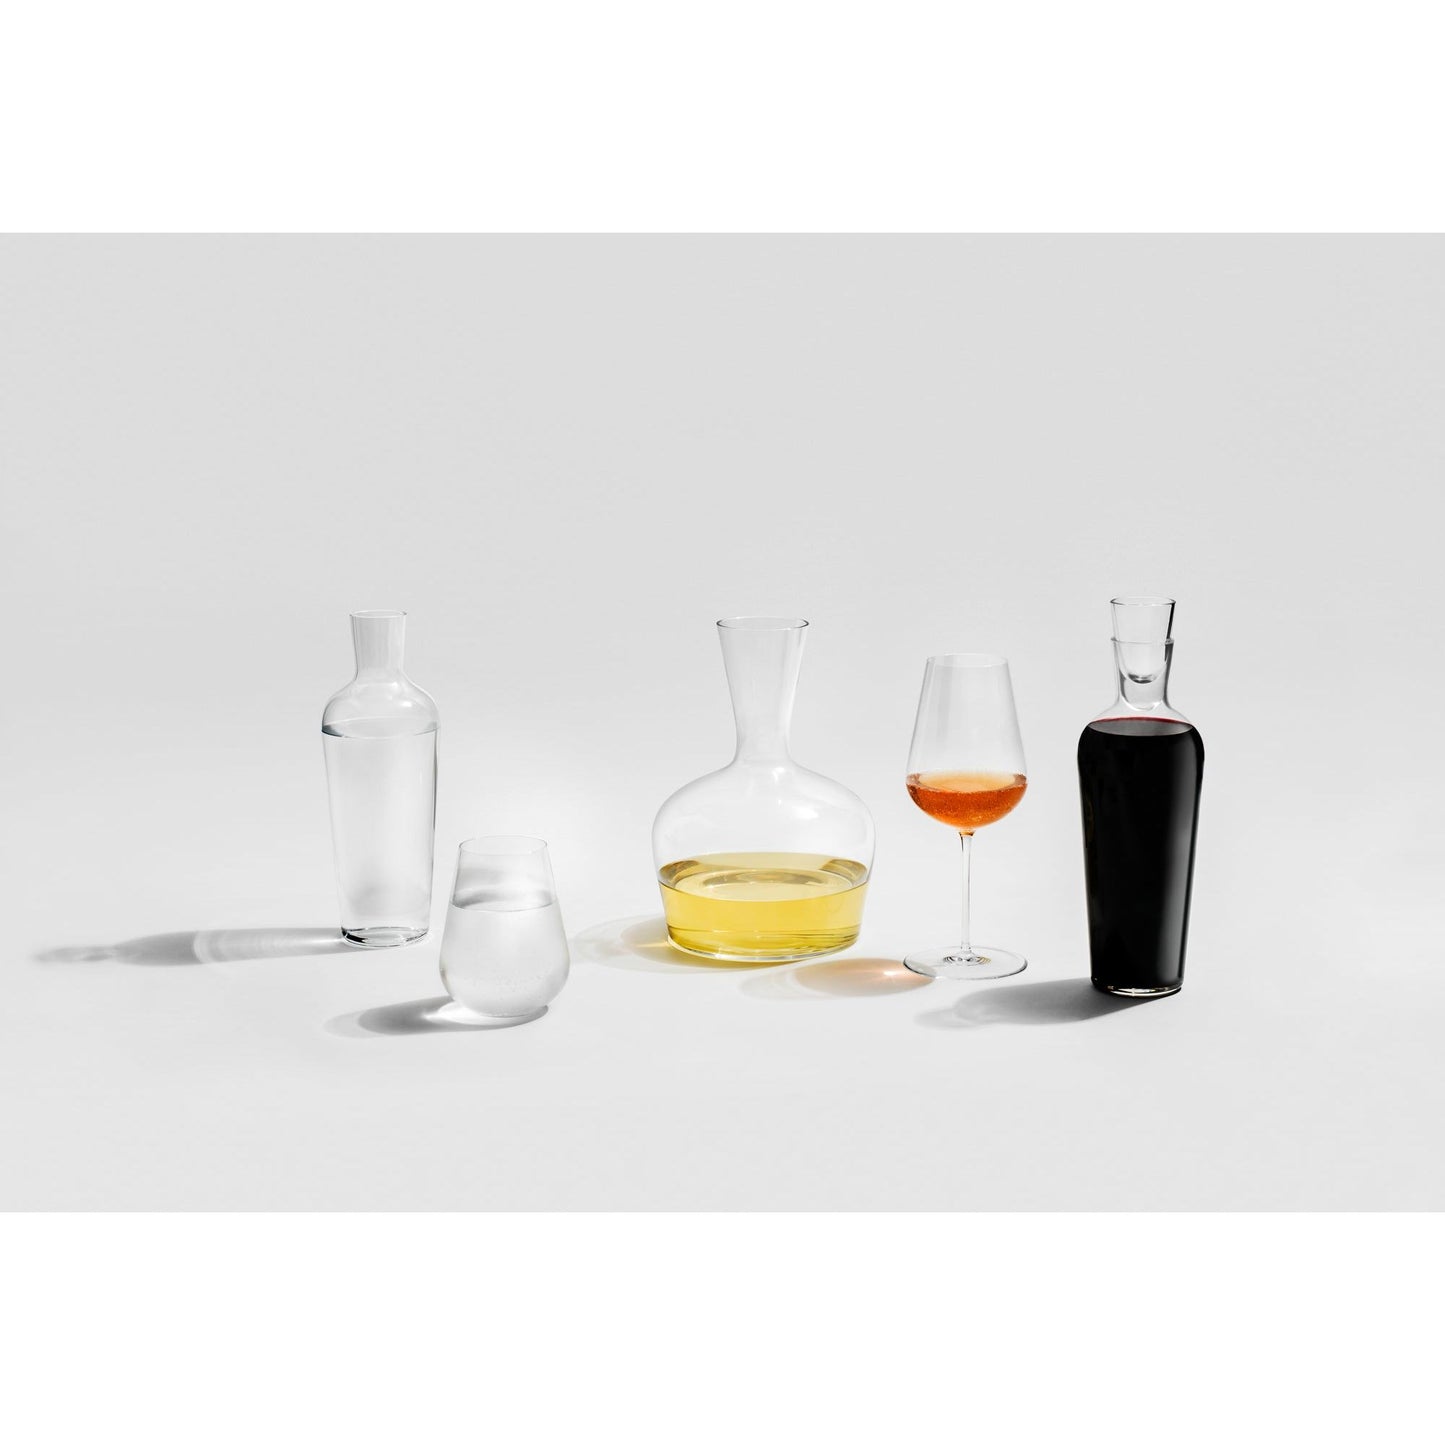 Richard Brendon The Jancis Robinson Collection | Wine Glass set of 2